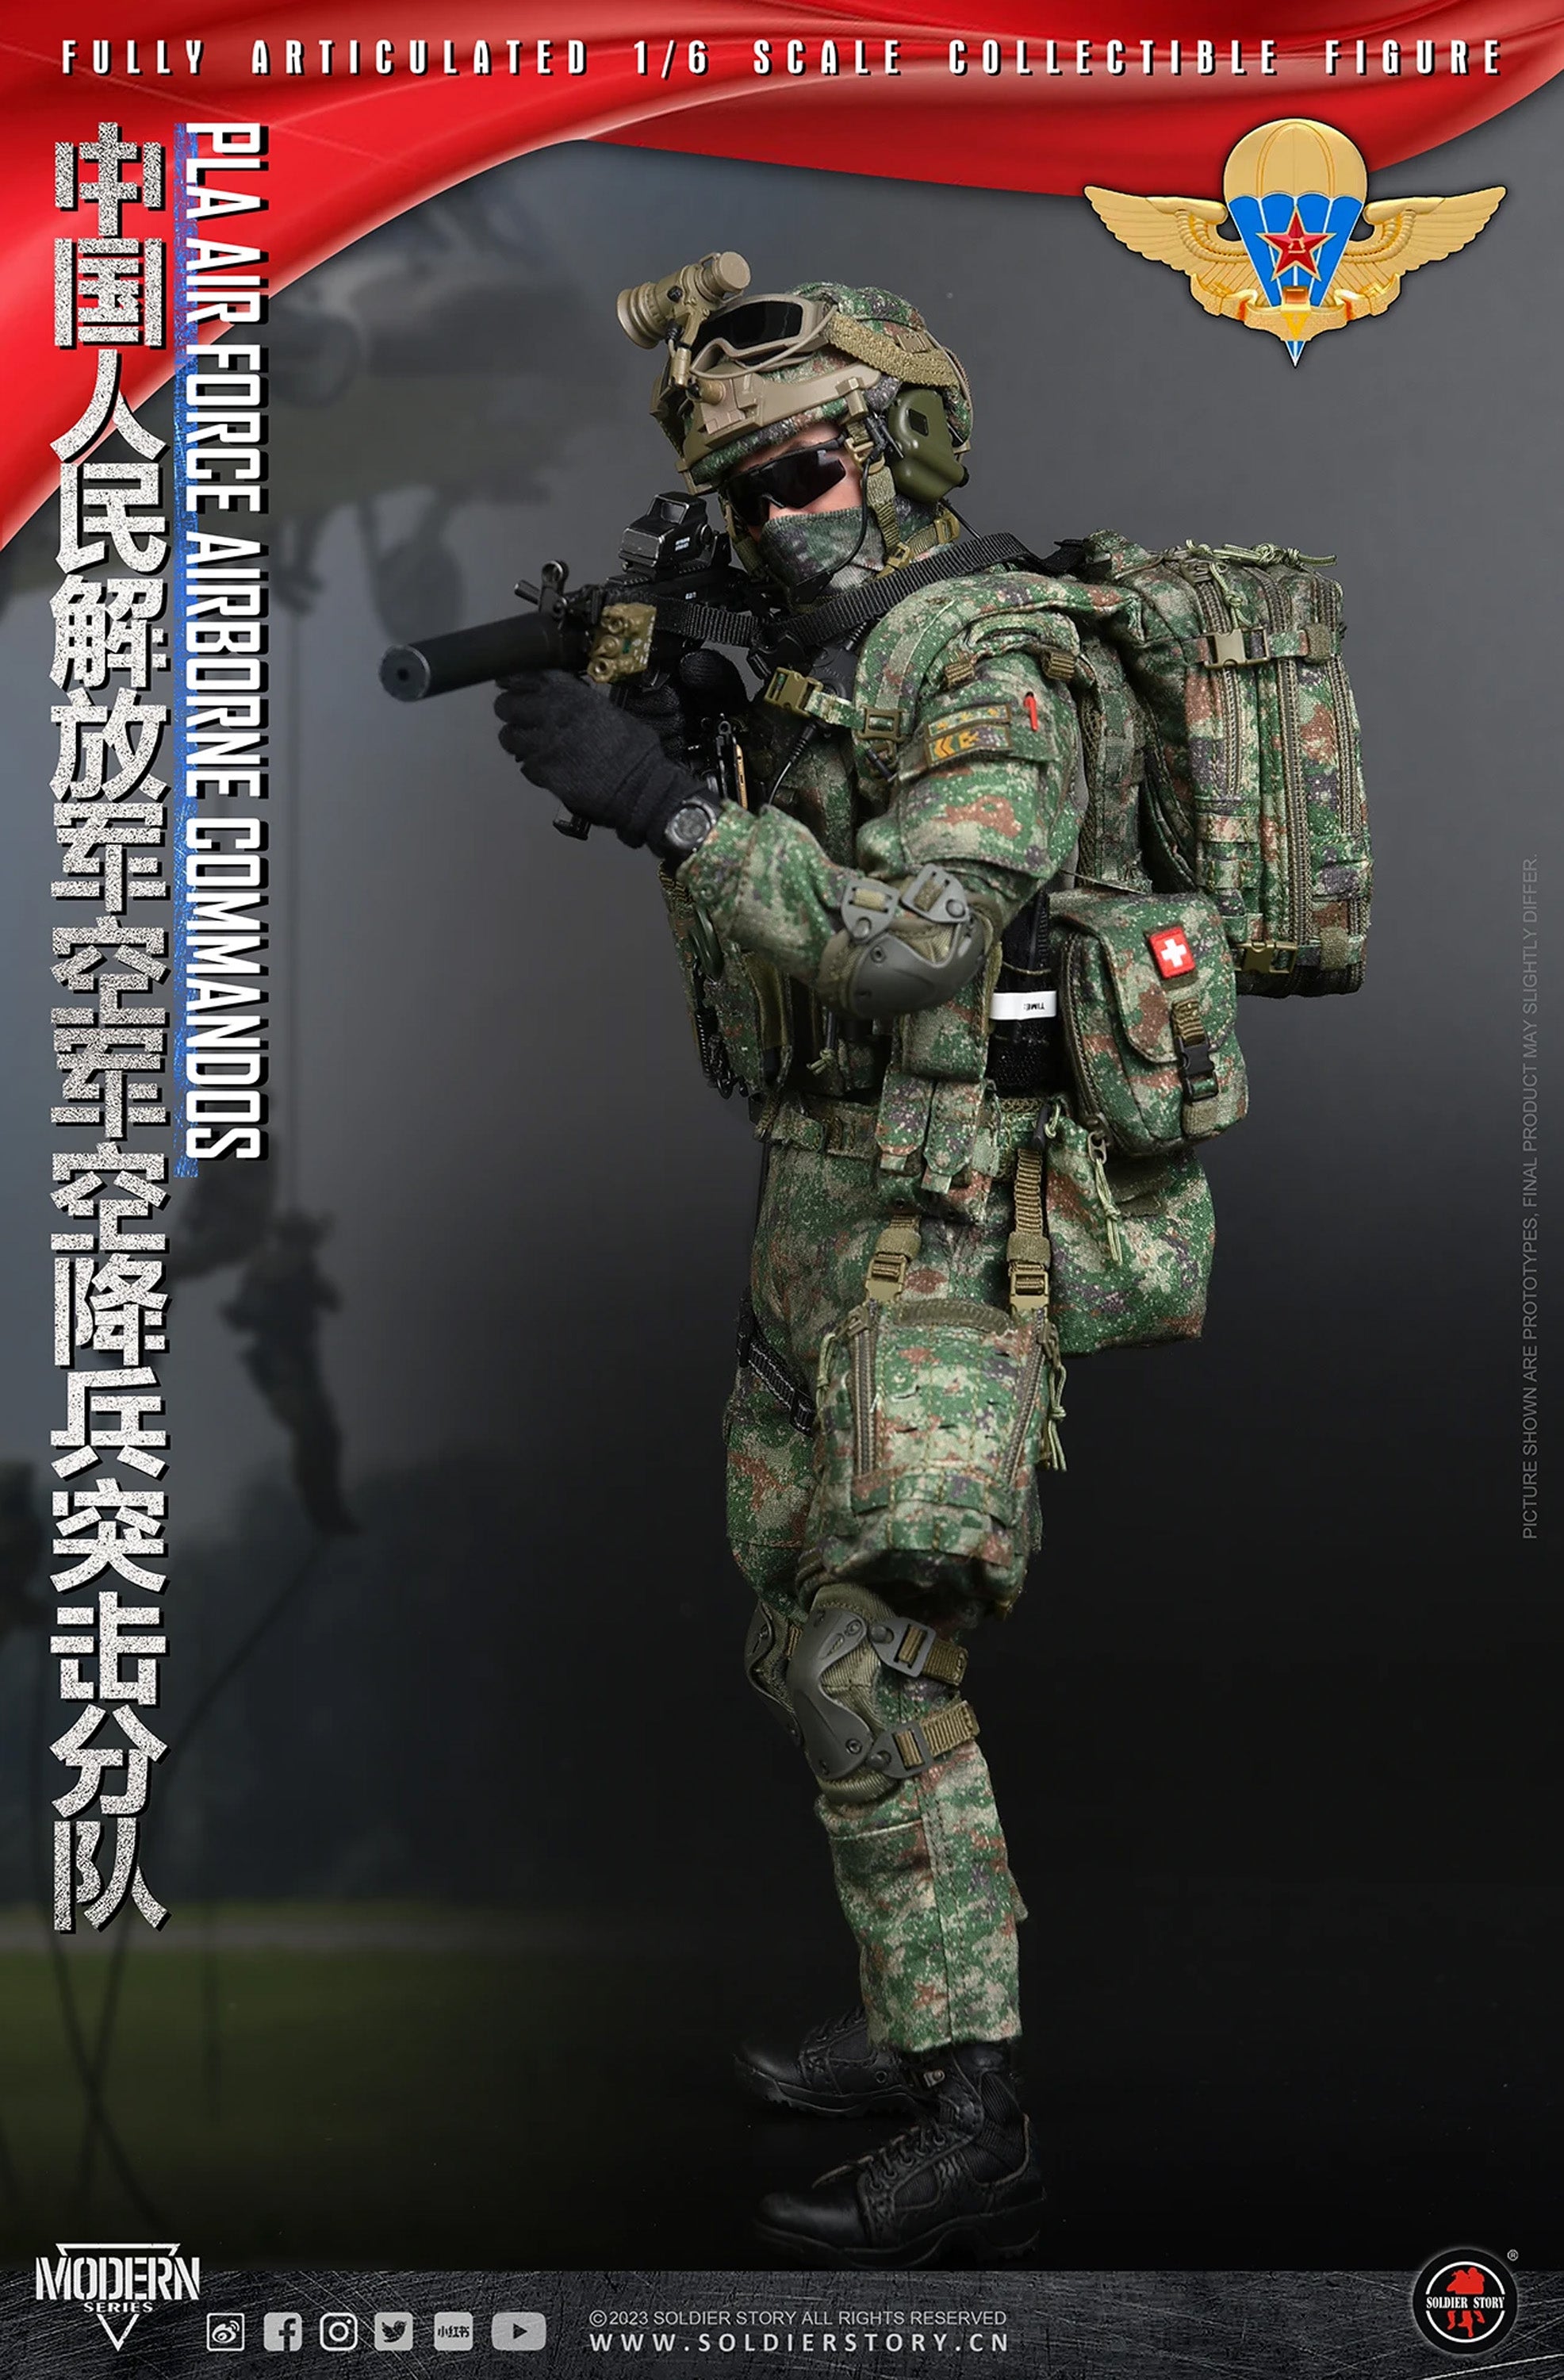 Soldier Story - SS133 - PLA Air Force Airborne Commando (Regular Ver.) - Marvelous Toys